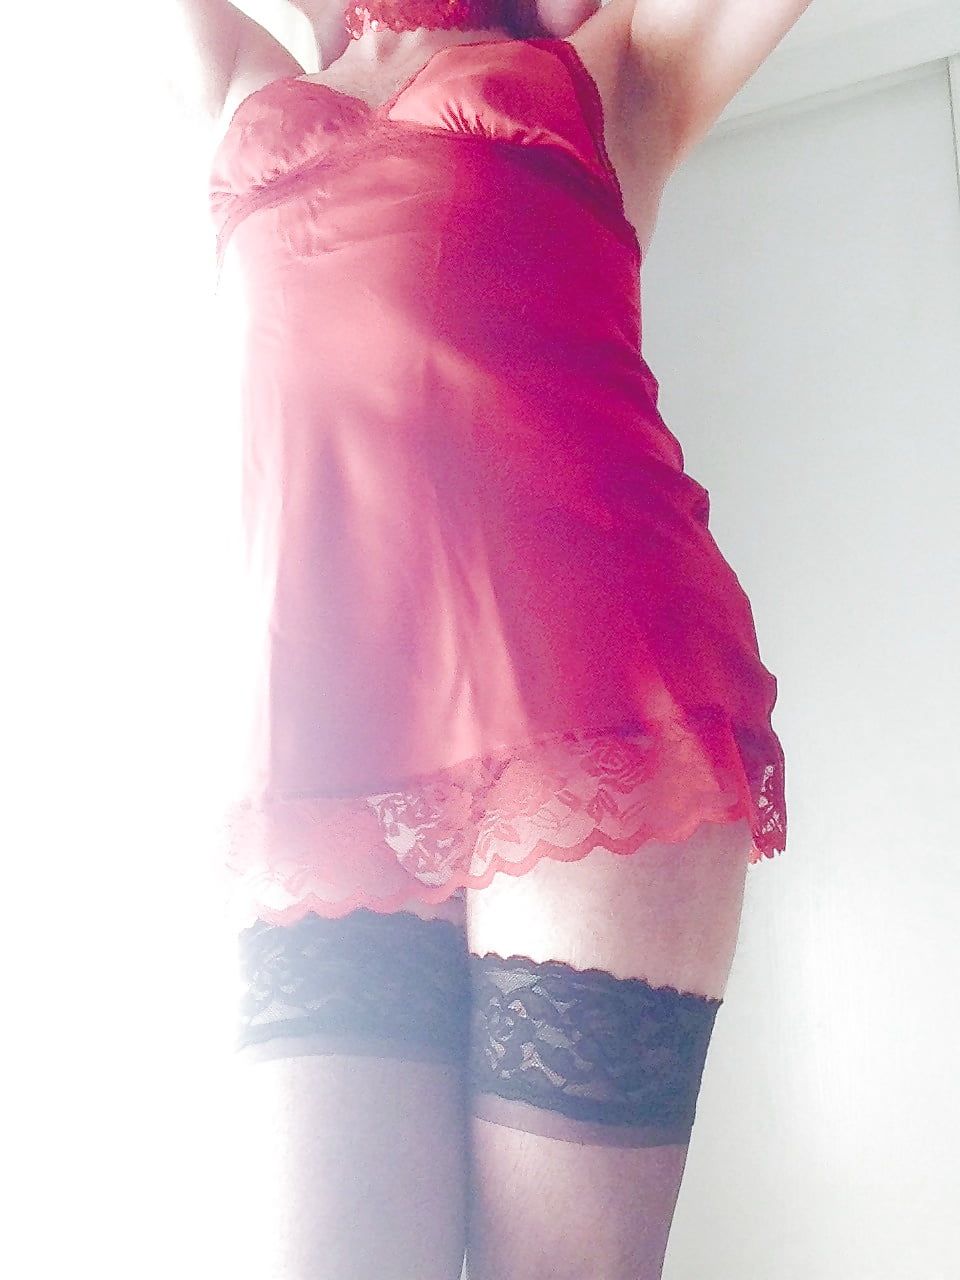 New sexy red satin lingerie and black stockings 